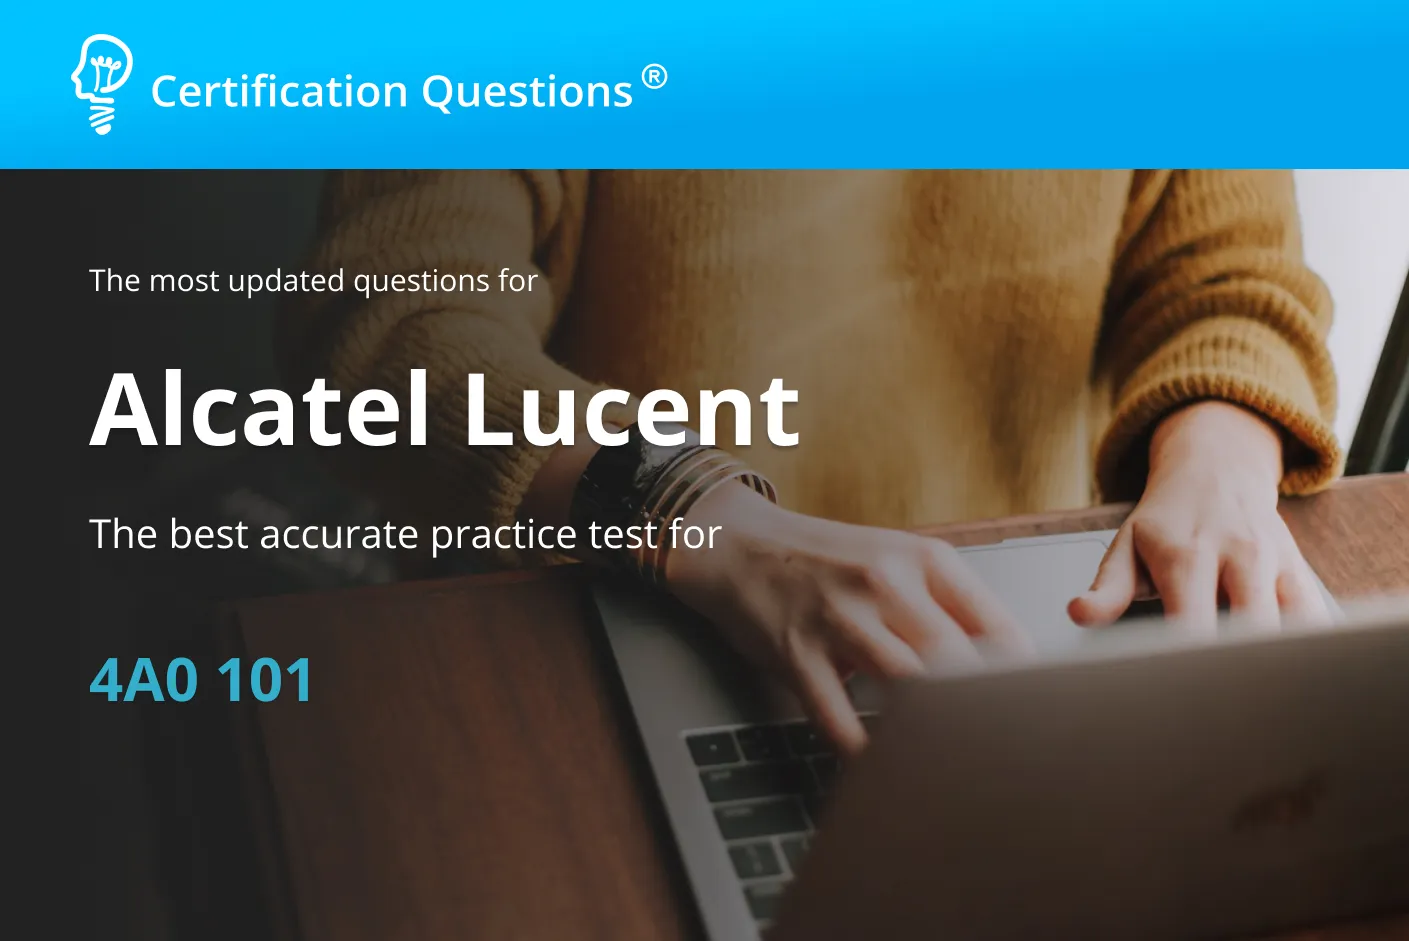 This image represents the Alcatel-Lucent 4a101 exam questions